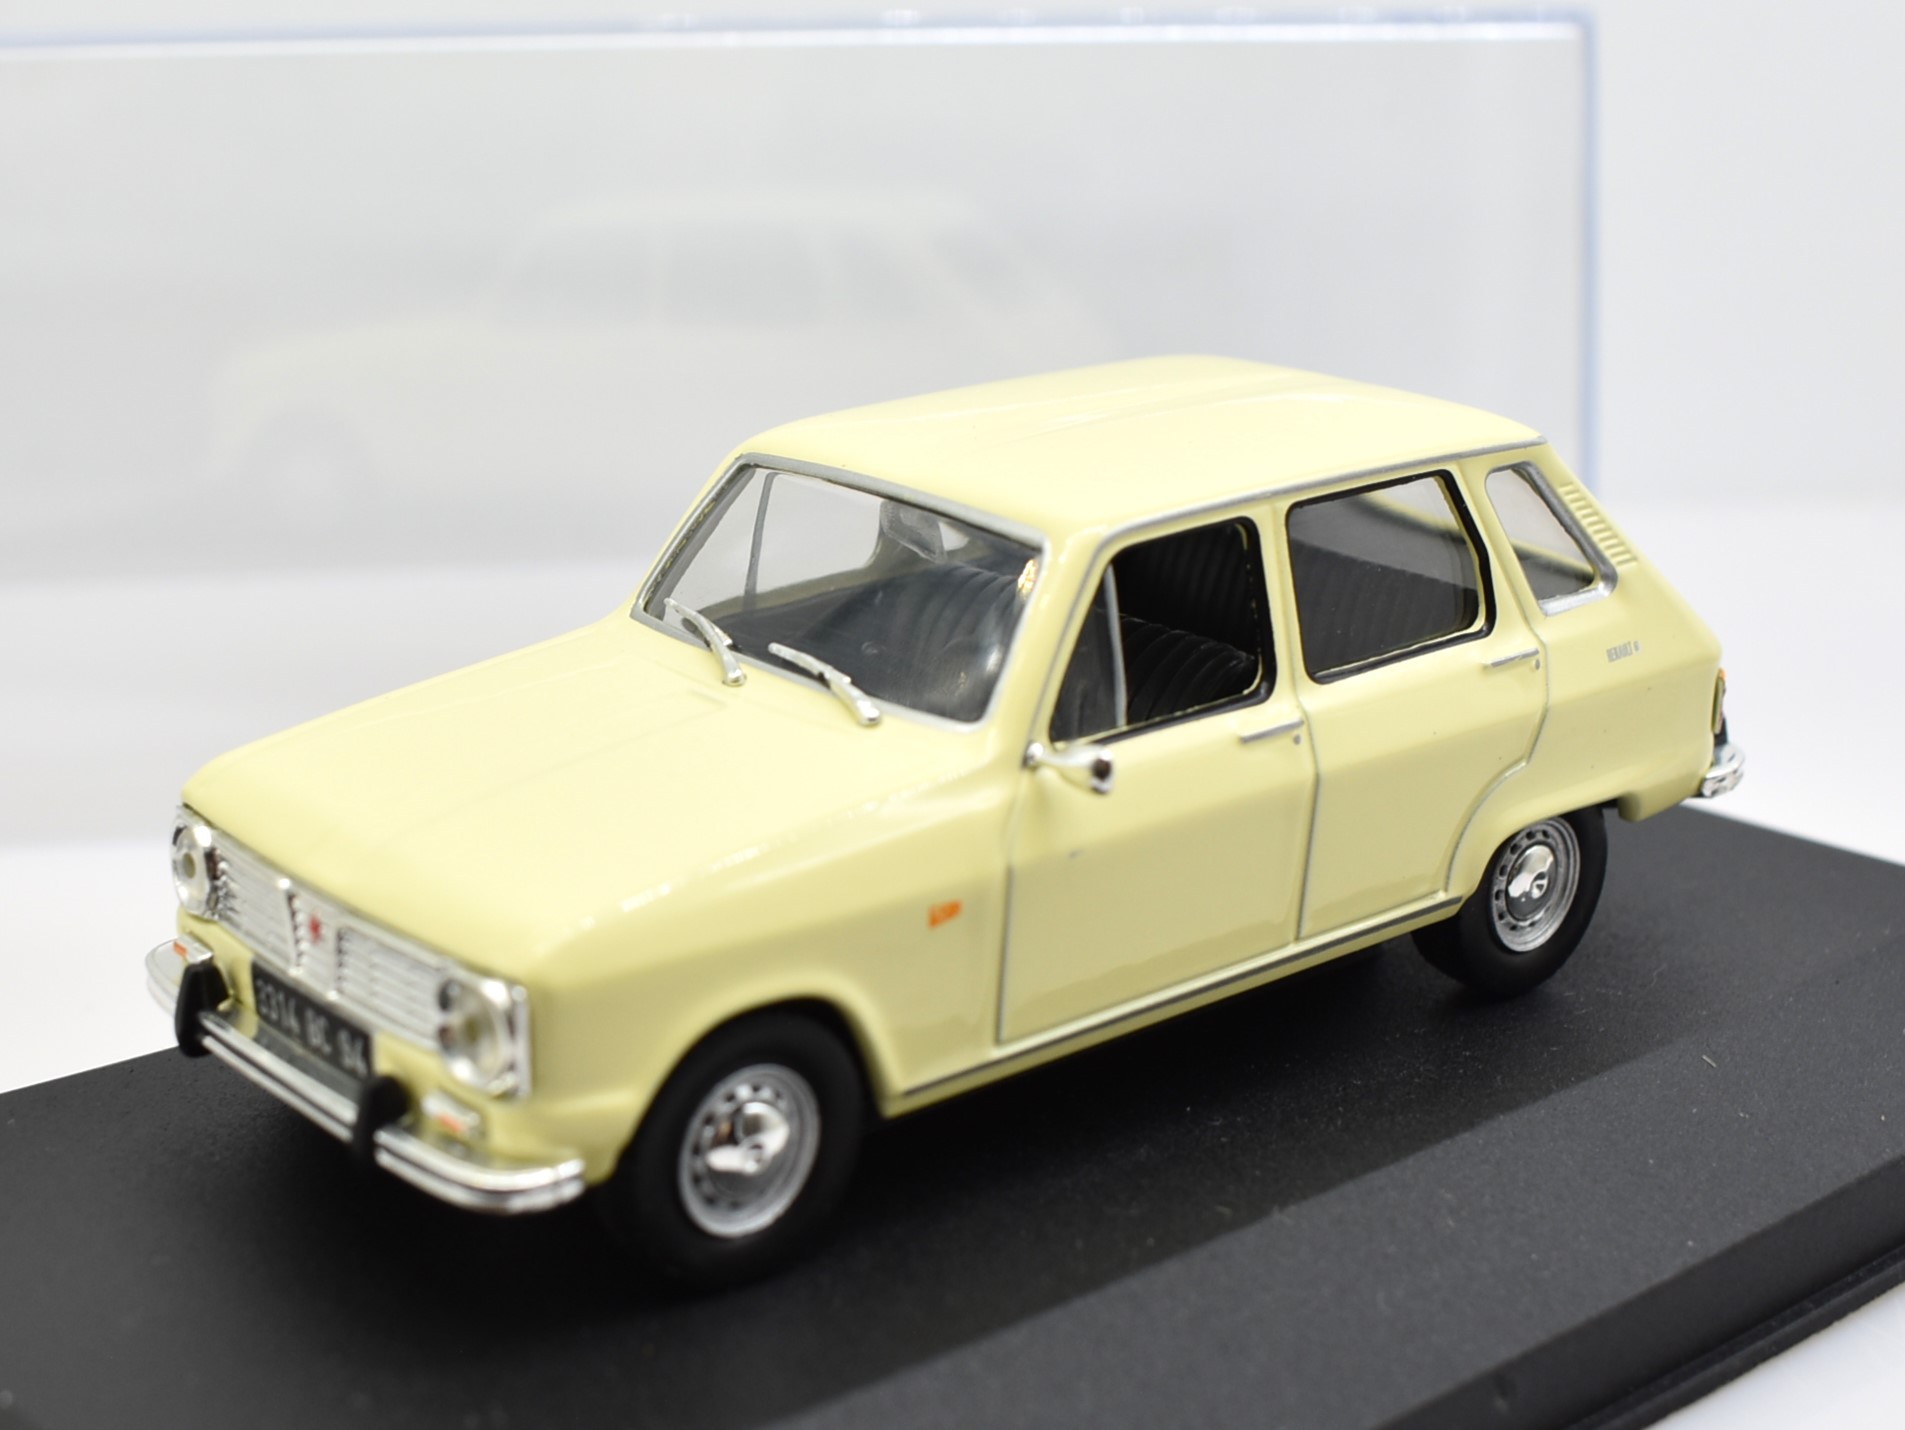 Model car 1:43 scale Renault 6 diecast vehiclesroad fromcollection